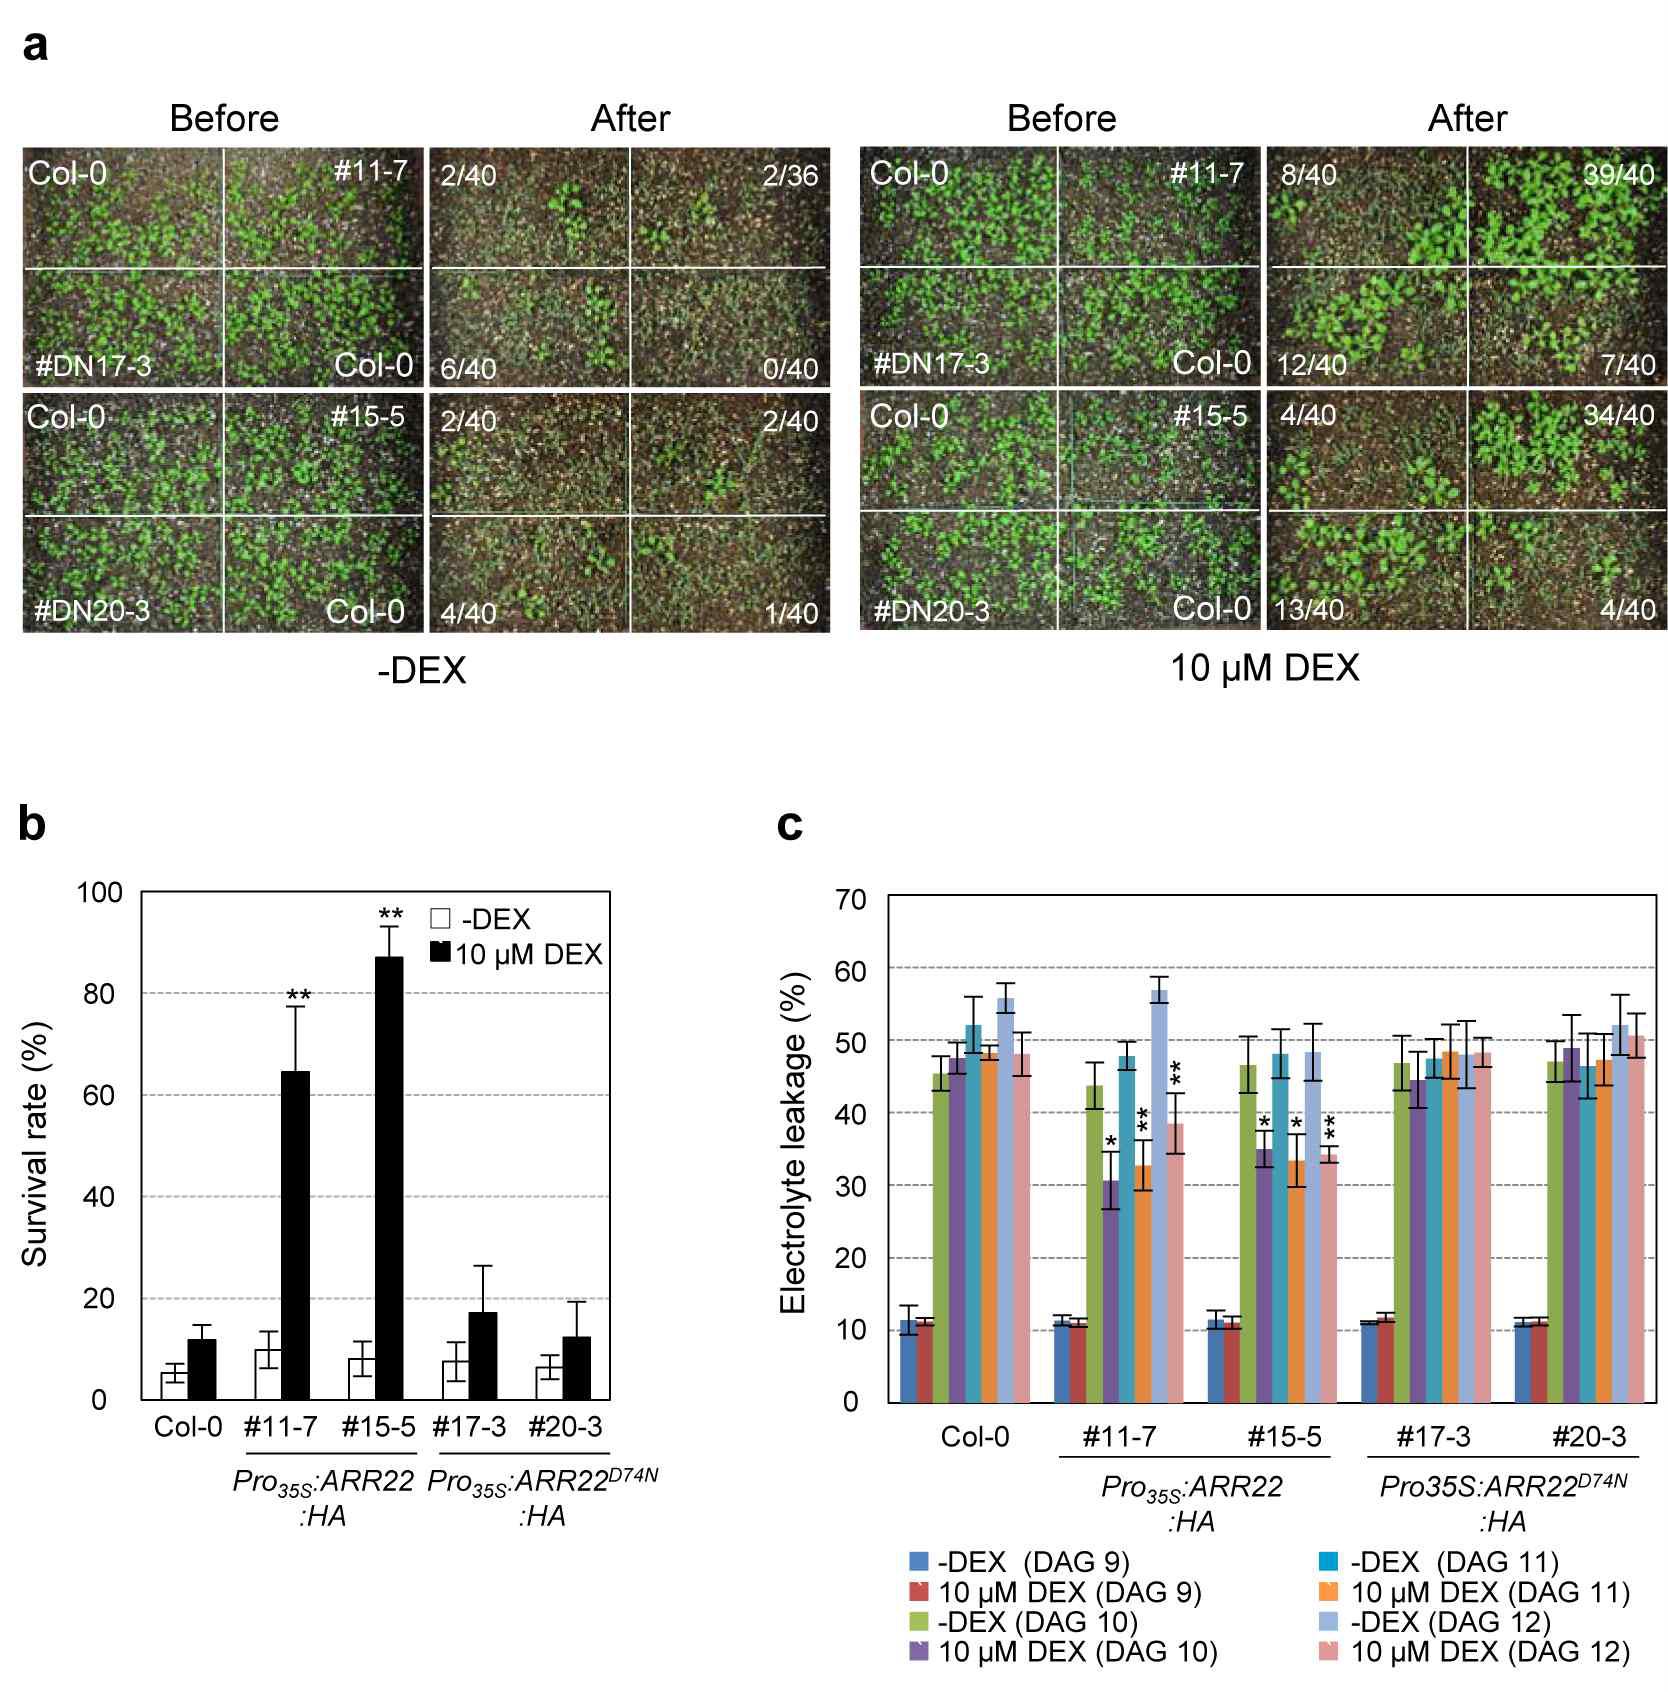 Survival rates and electrolyte leakages of Pro35S:ARR22:HA and Pro35S:ARR22D74N:HA transgenic Arabidopsis plants treated with or without DEX after drought stress treatment.